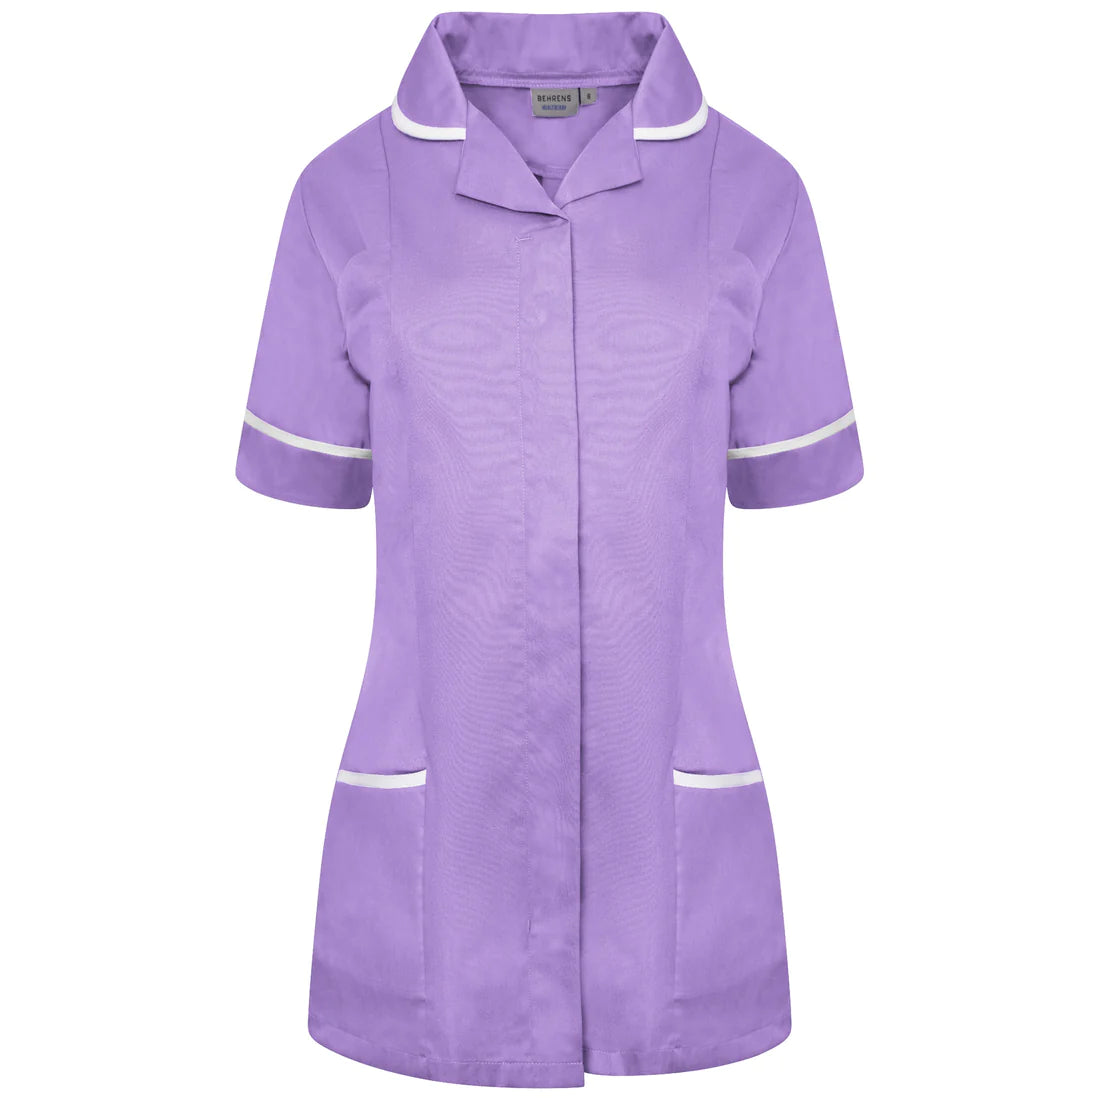 Lilac/White Contrast Ladies Tunic with Round Collar - NCLTPS